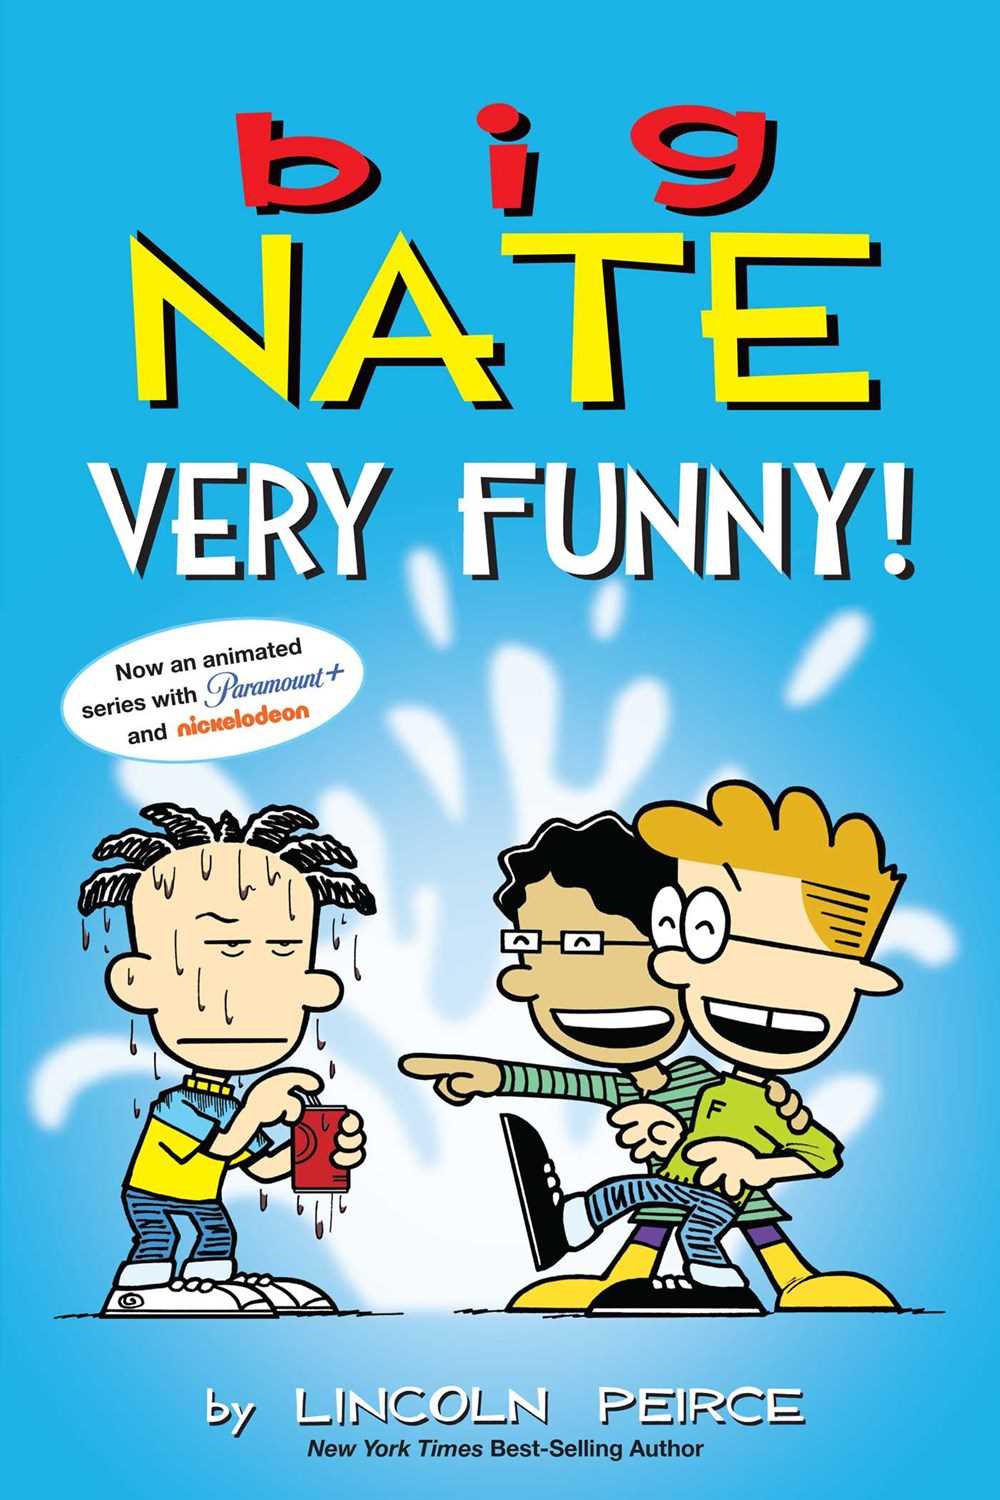 Very Funny! (Big Nate #14 and #15)